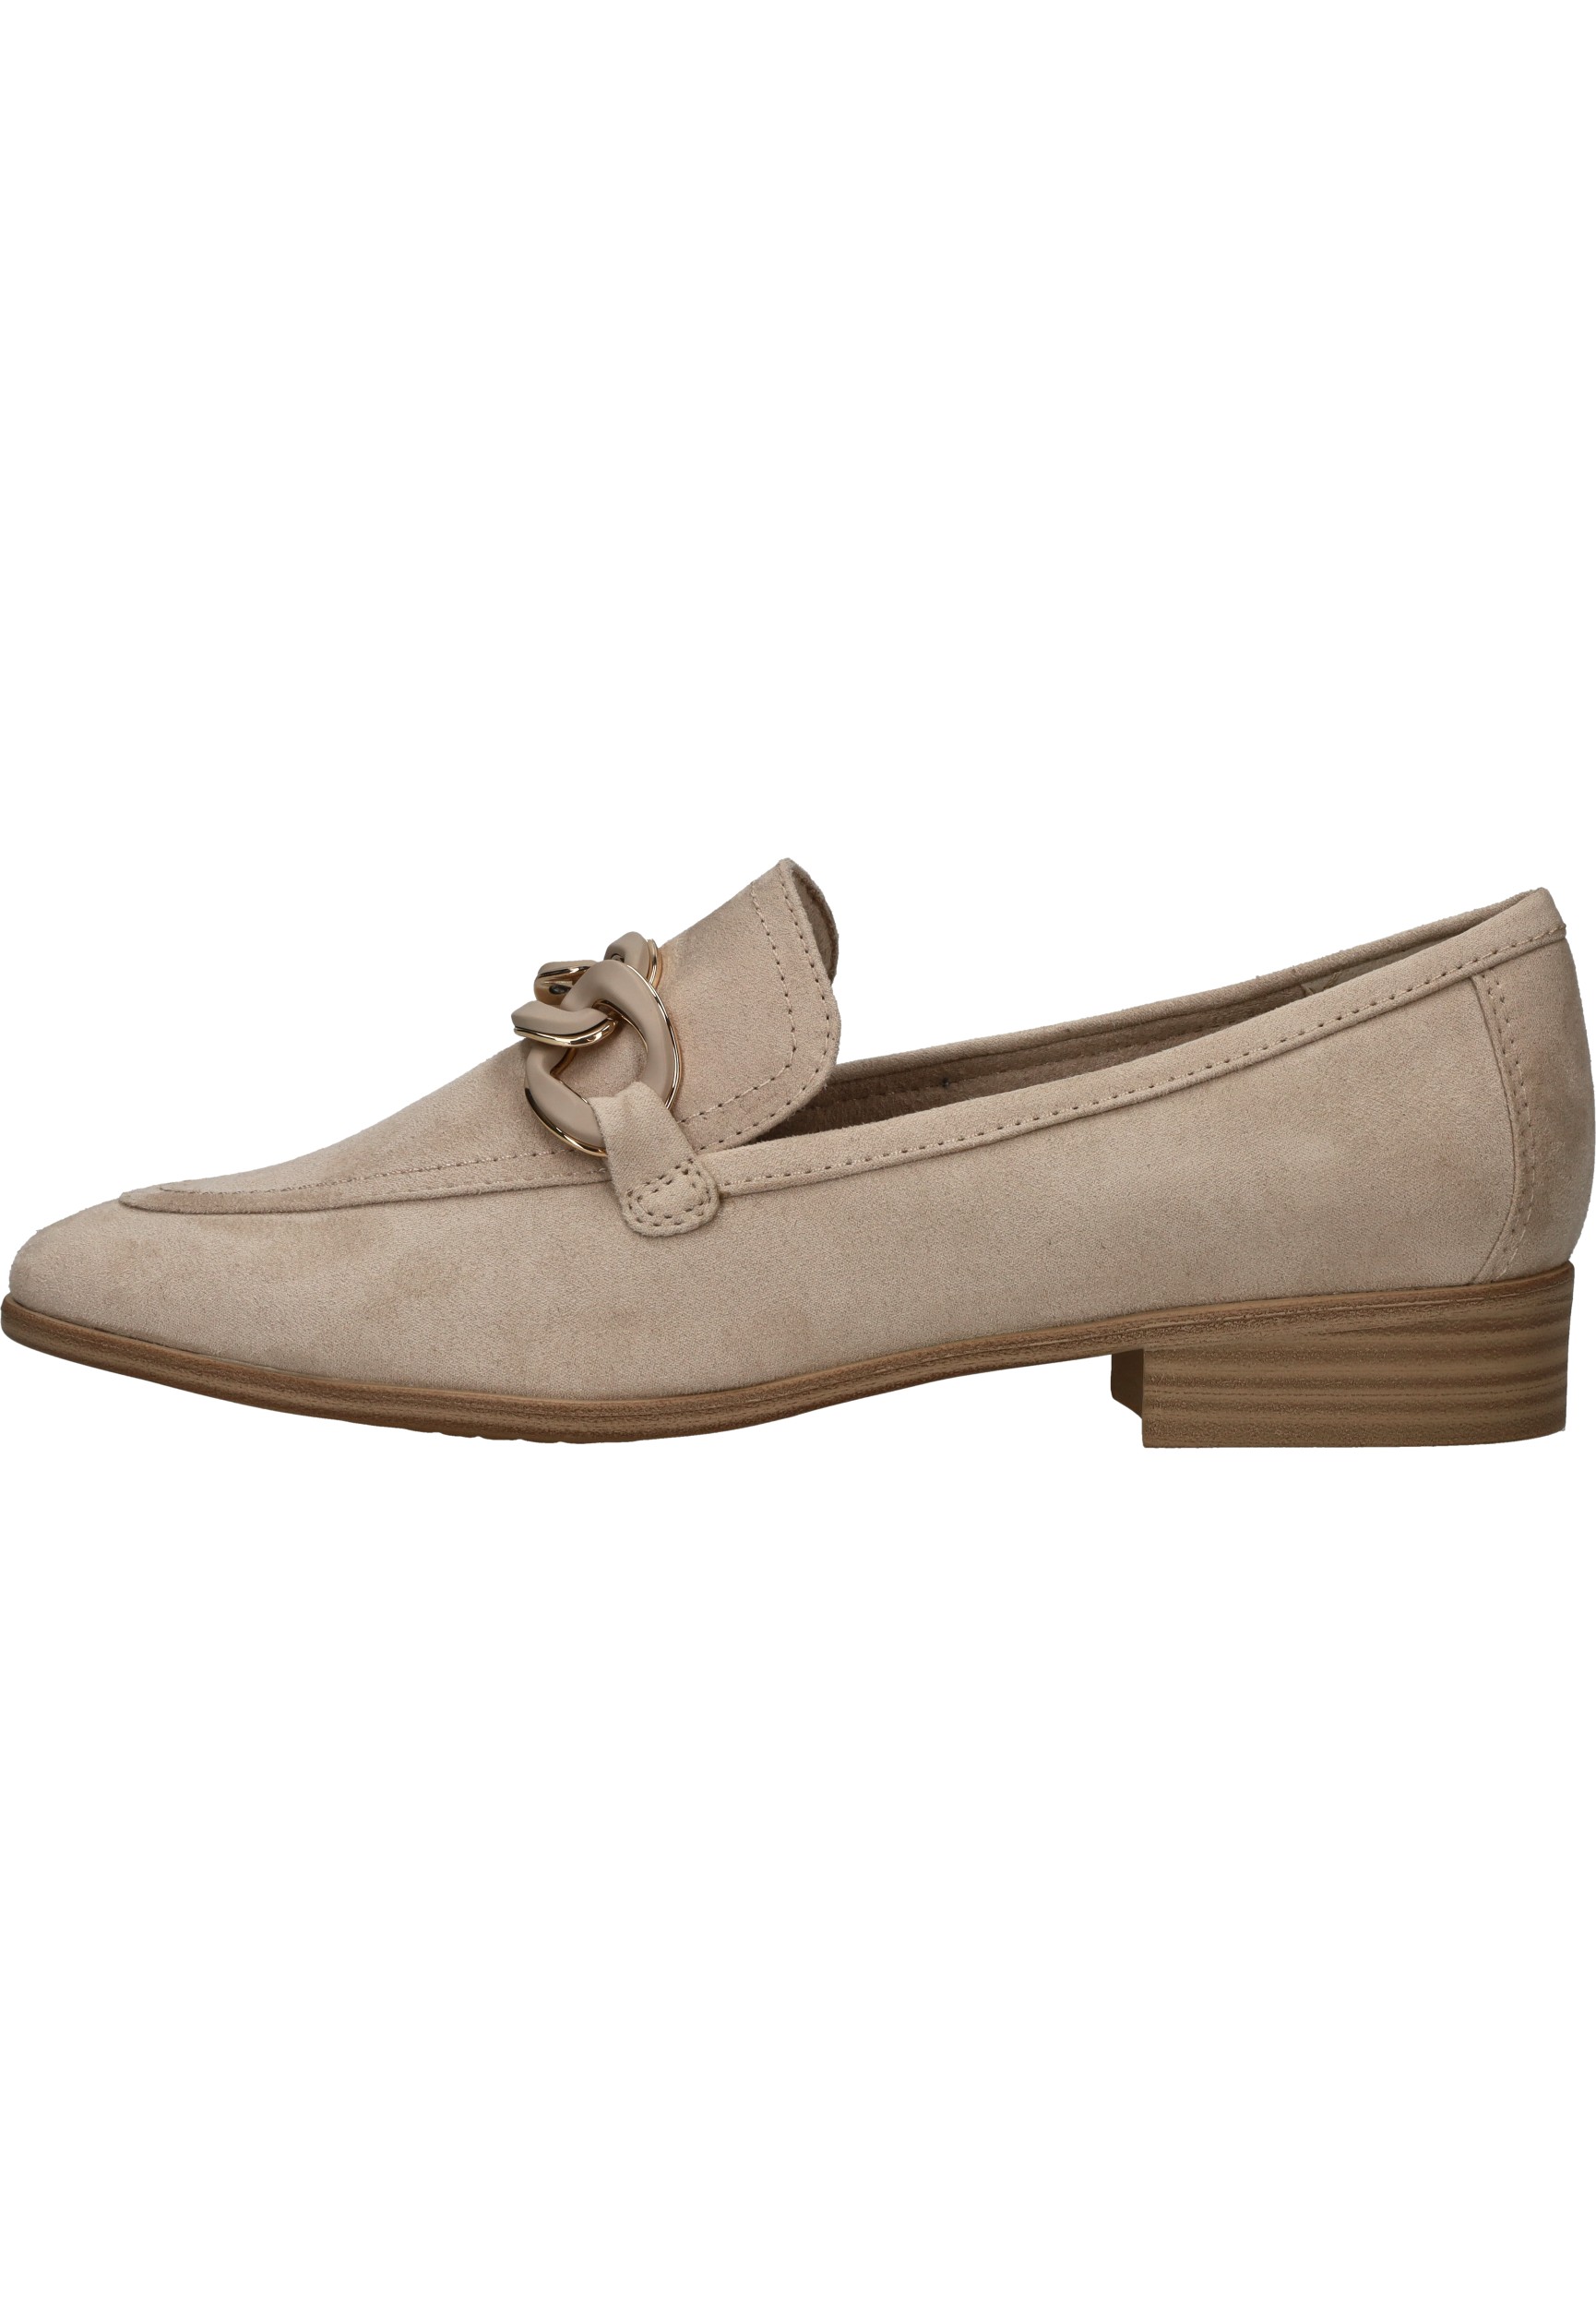 MARCO TOZZI MT Soft Lining + Feel Me - insole Dames Slippers - DUNE - Maat 38